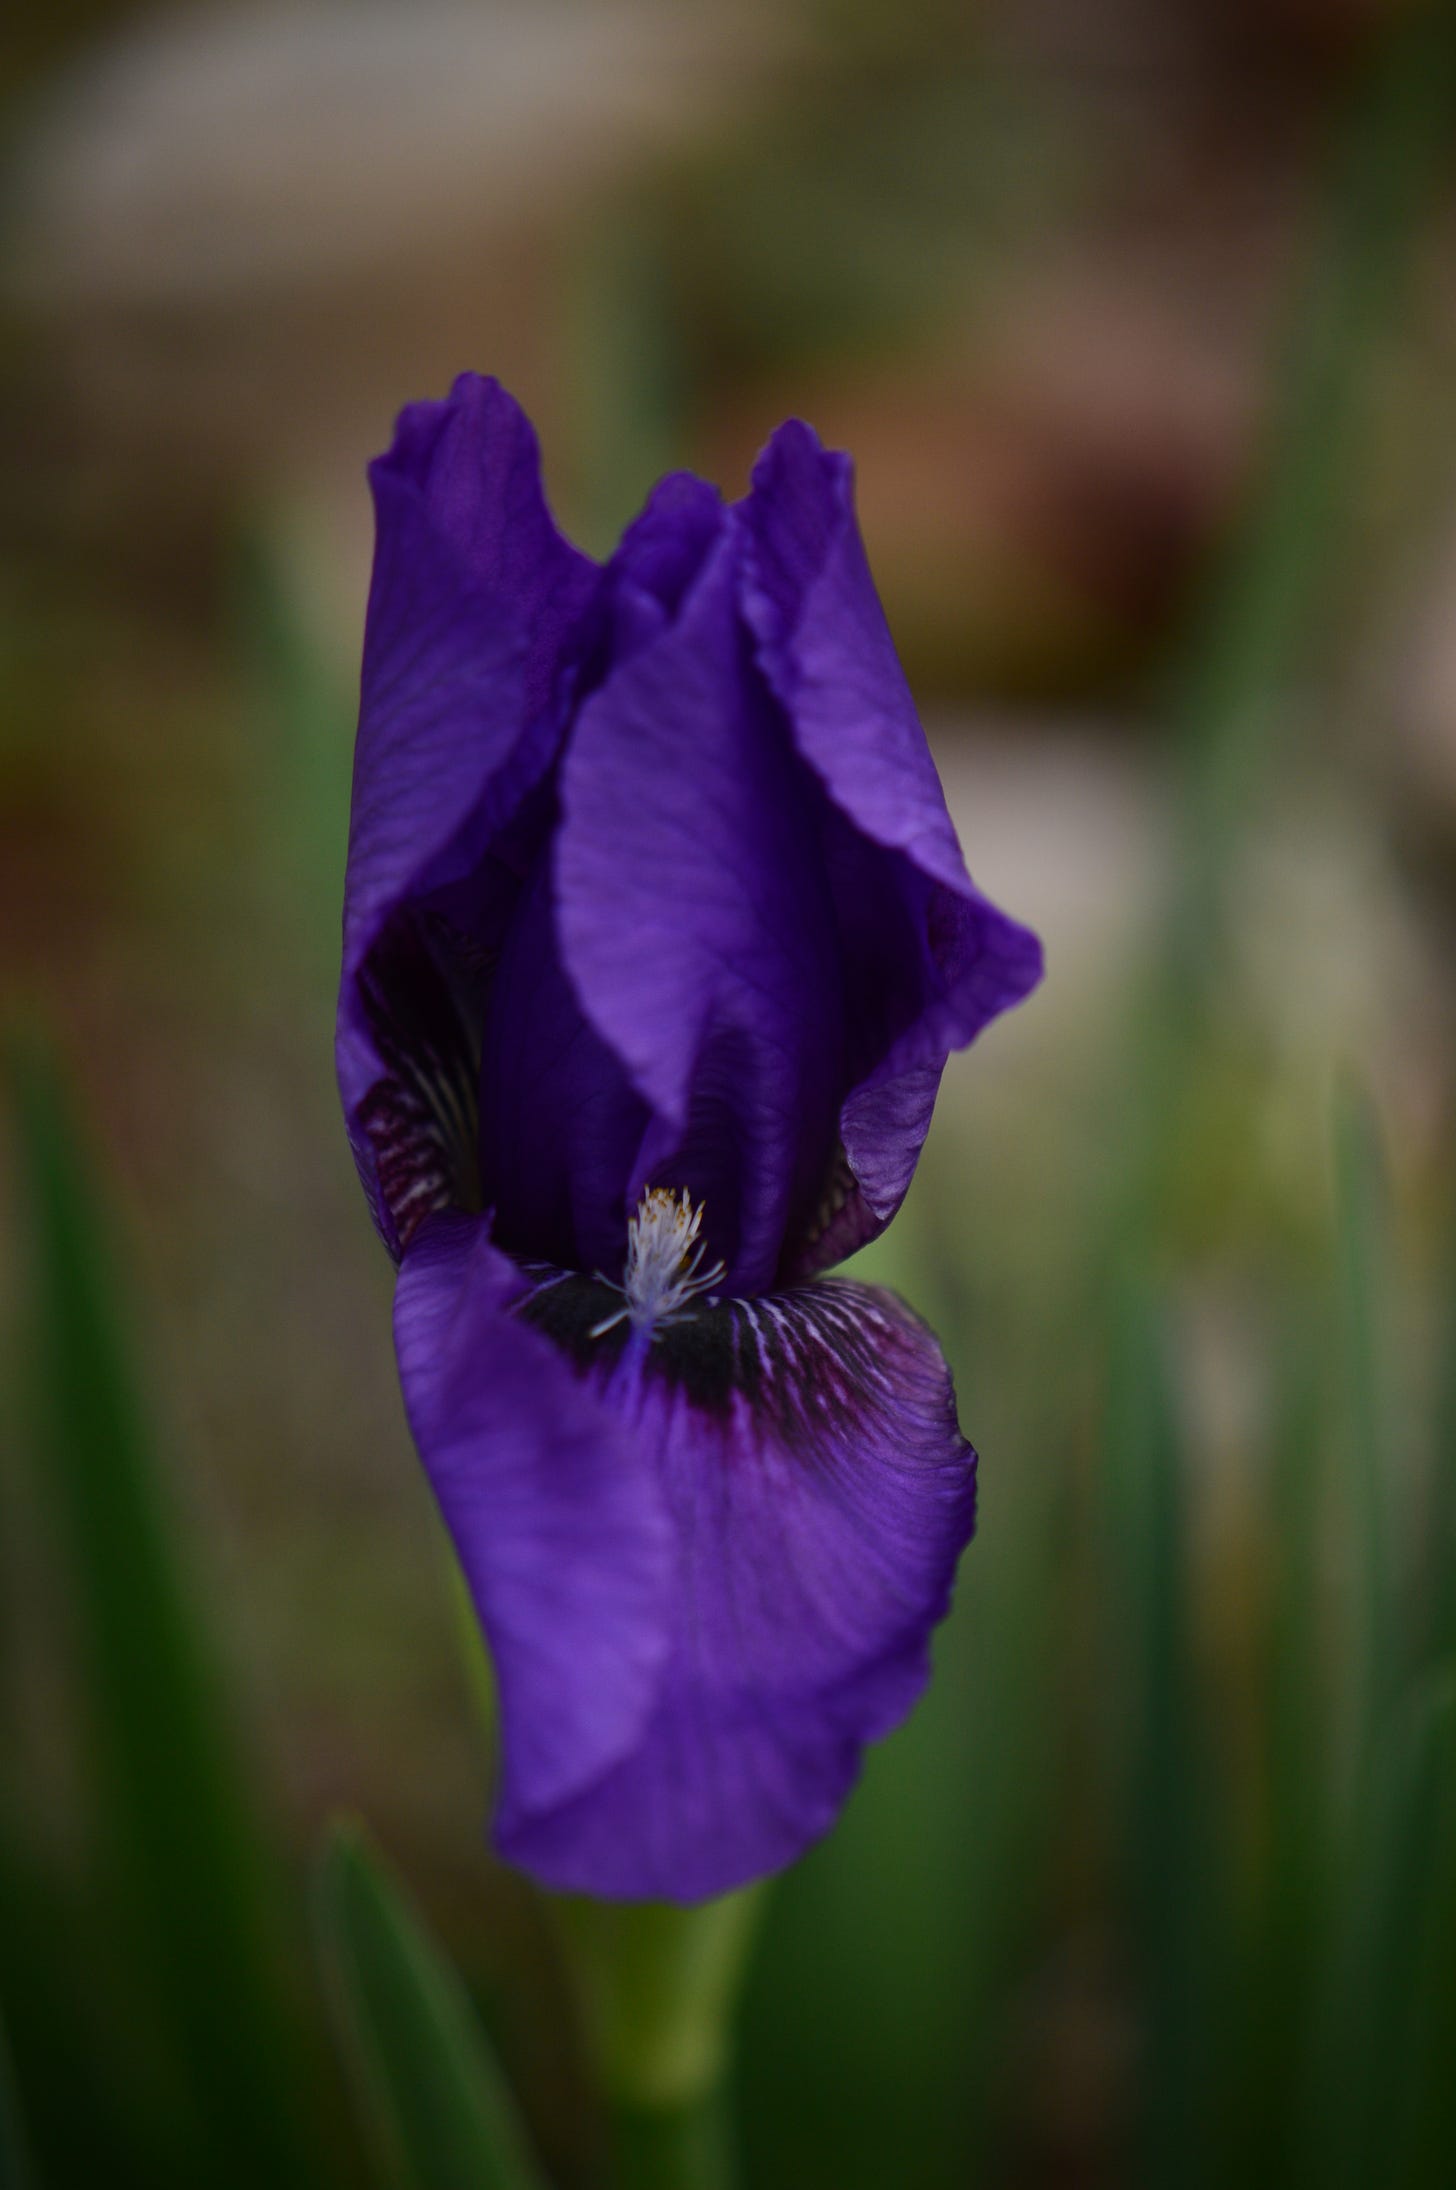 a deep violet iris bud with one petal unfurling to reveal a darker-colored blotch near the center, topped by a pale white beard